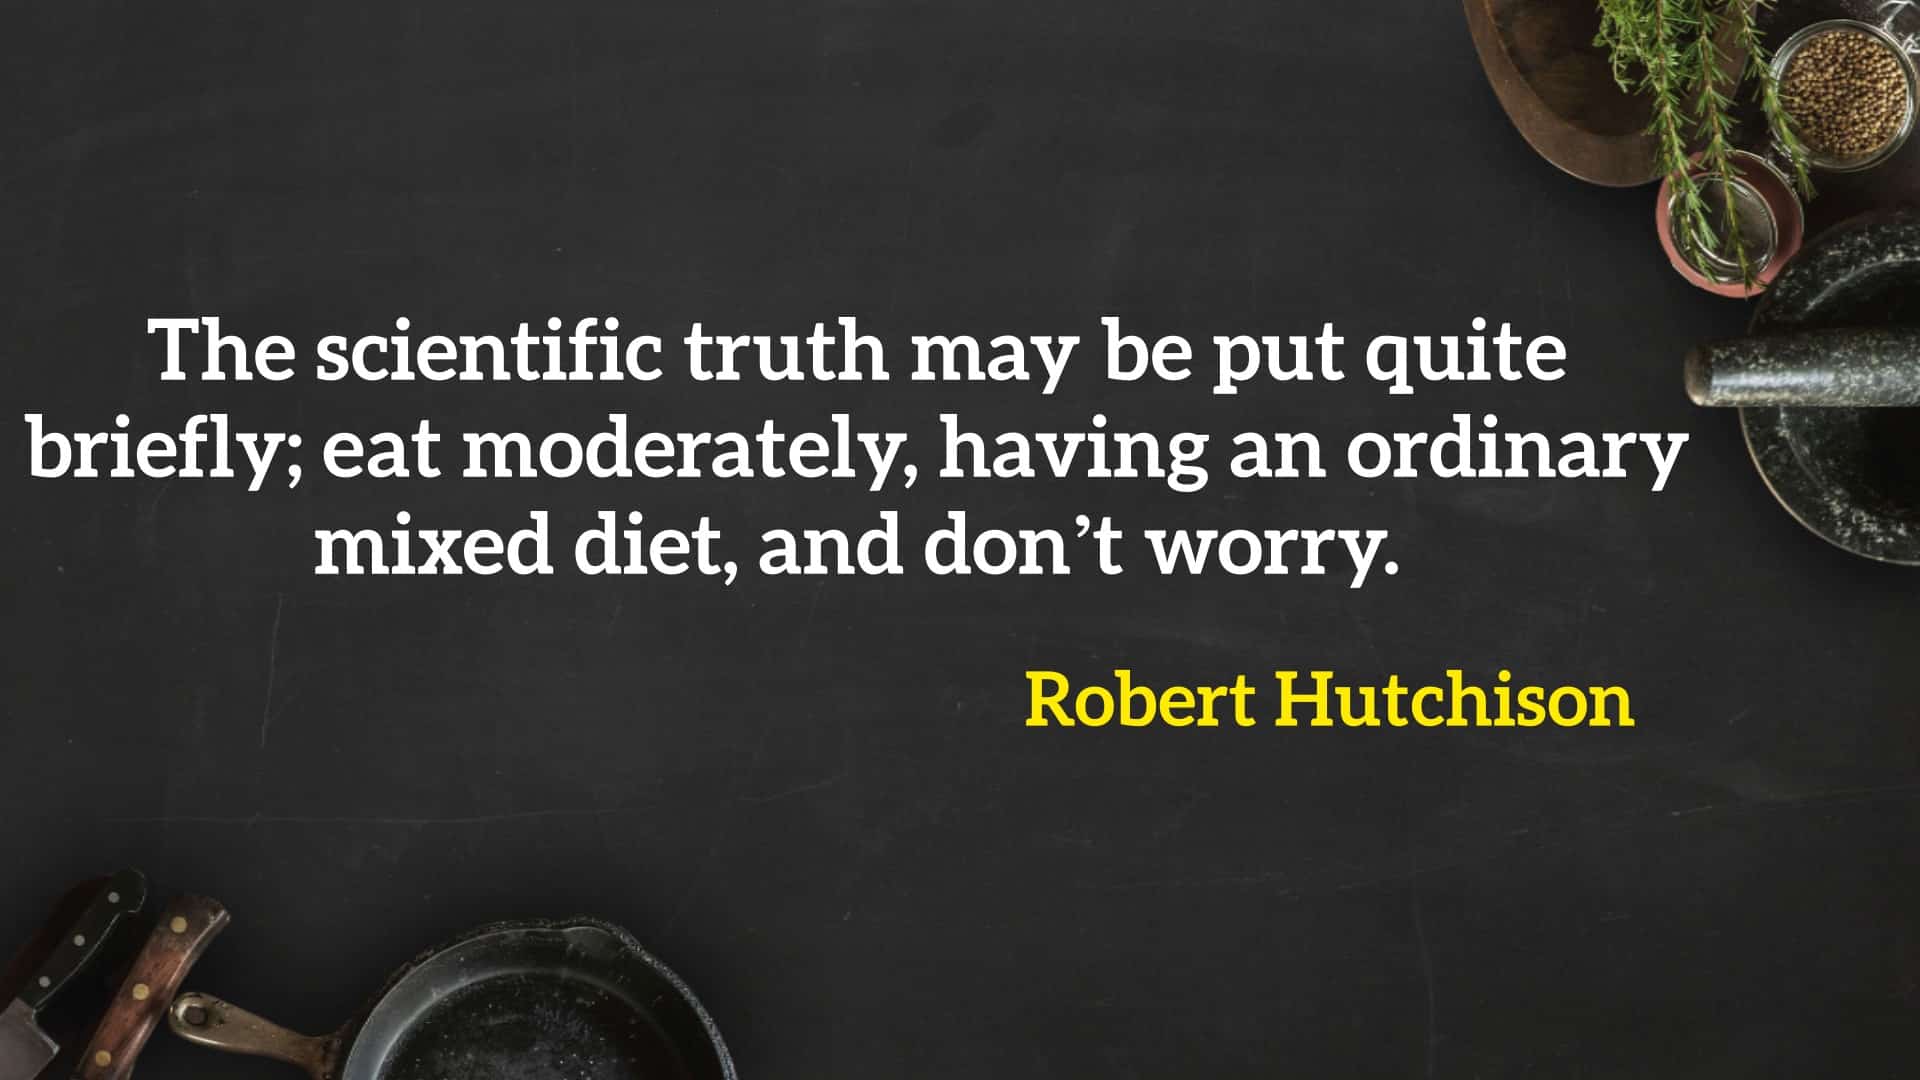 The scientific truth may be put quite briefly; eat moderately, having an ordinary mixed diet, and don’t worry.” - Robert Hutchison